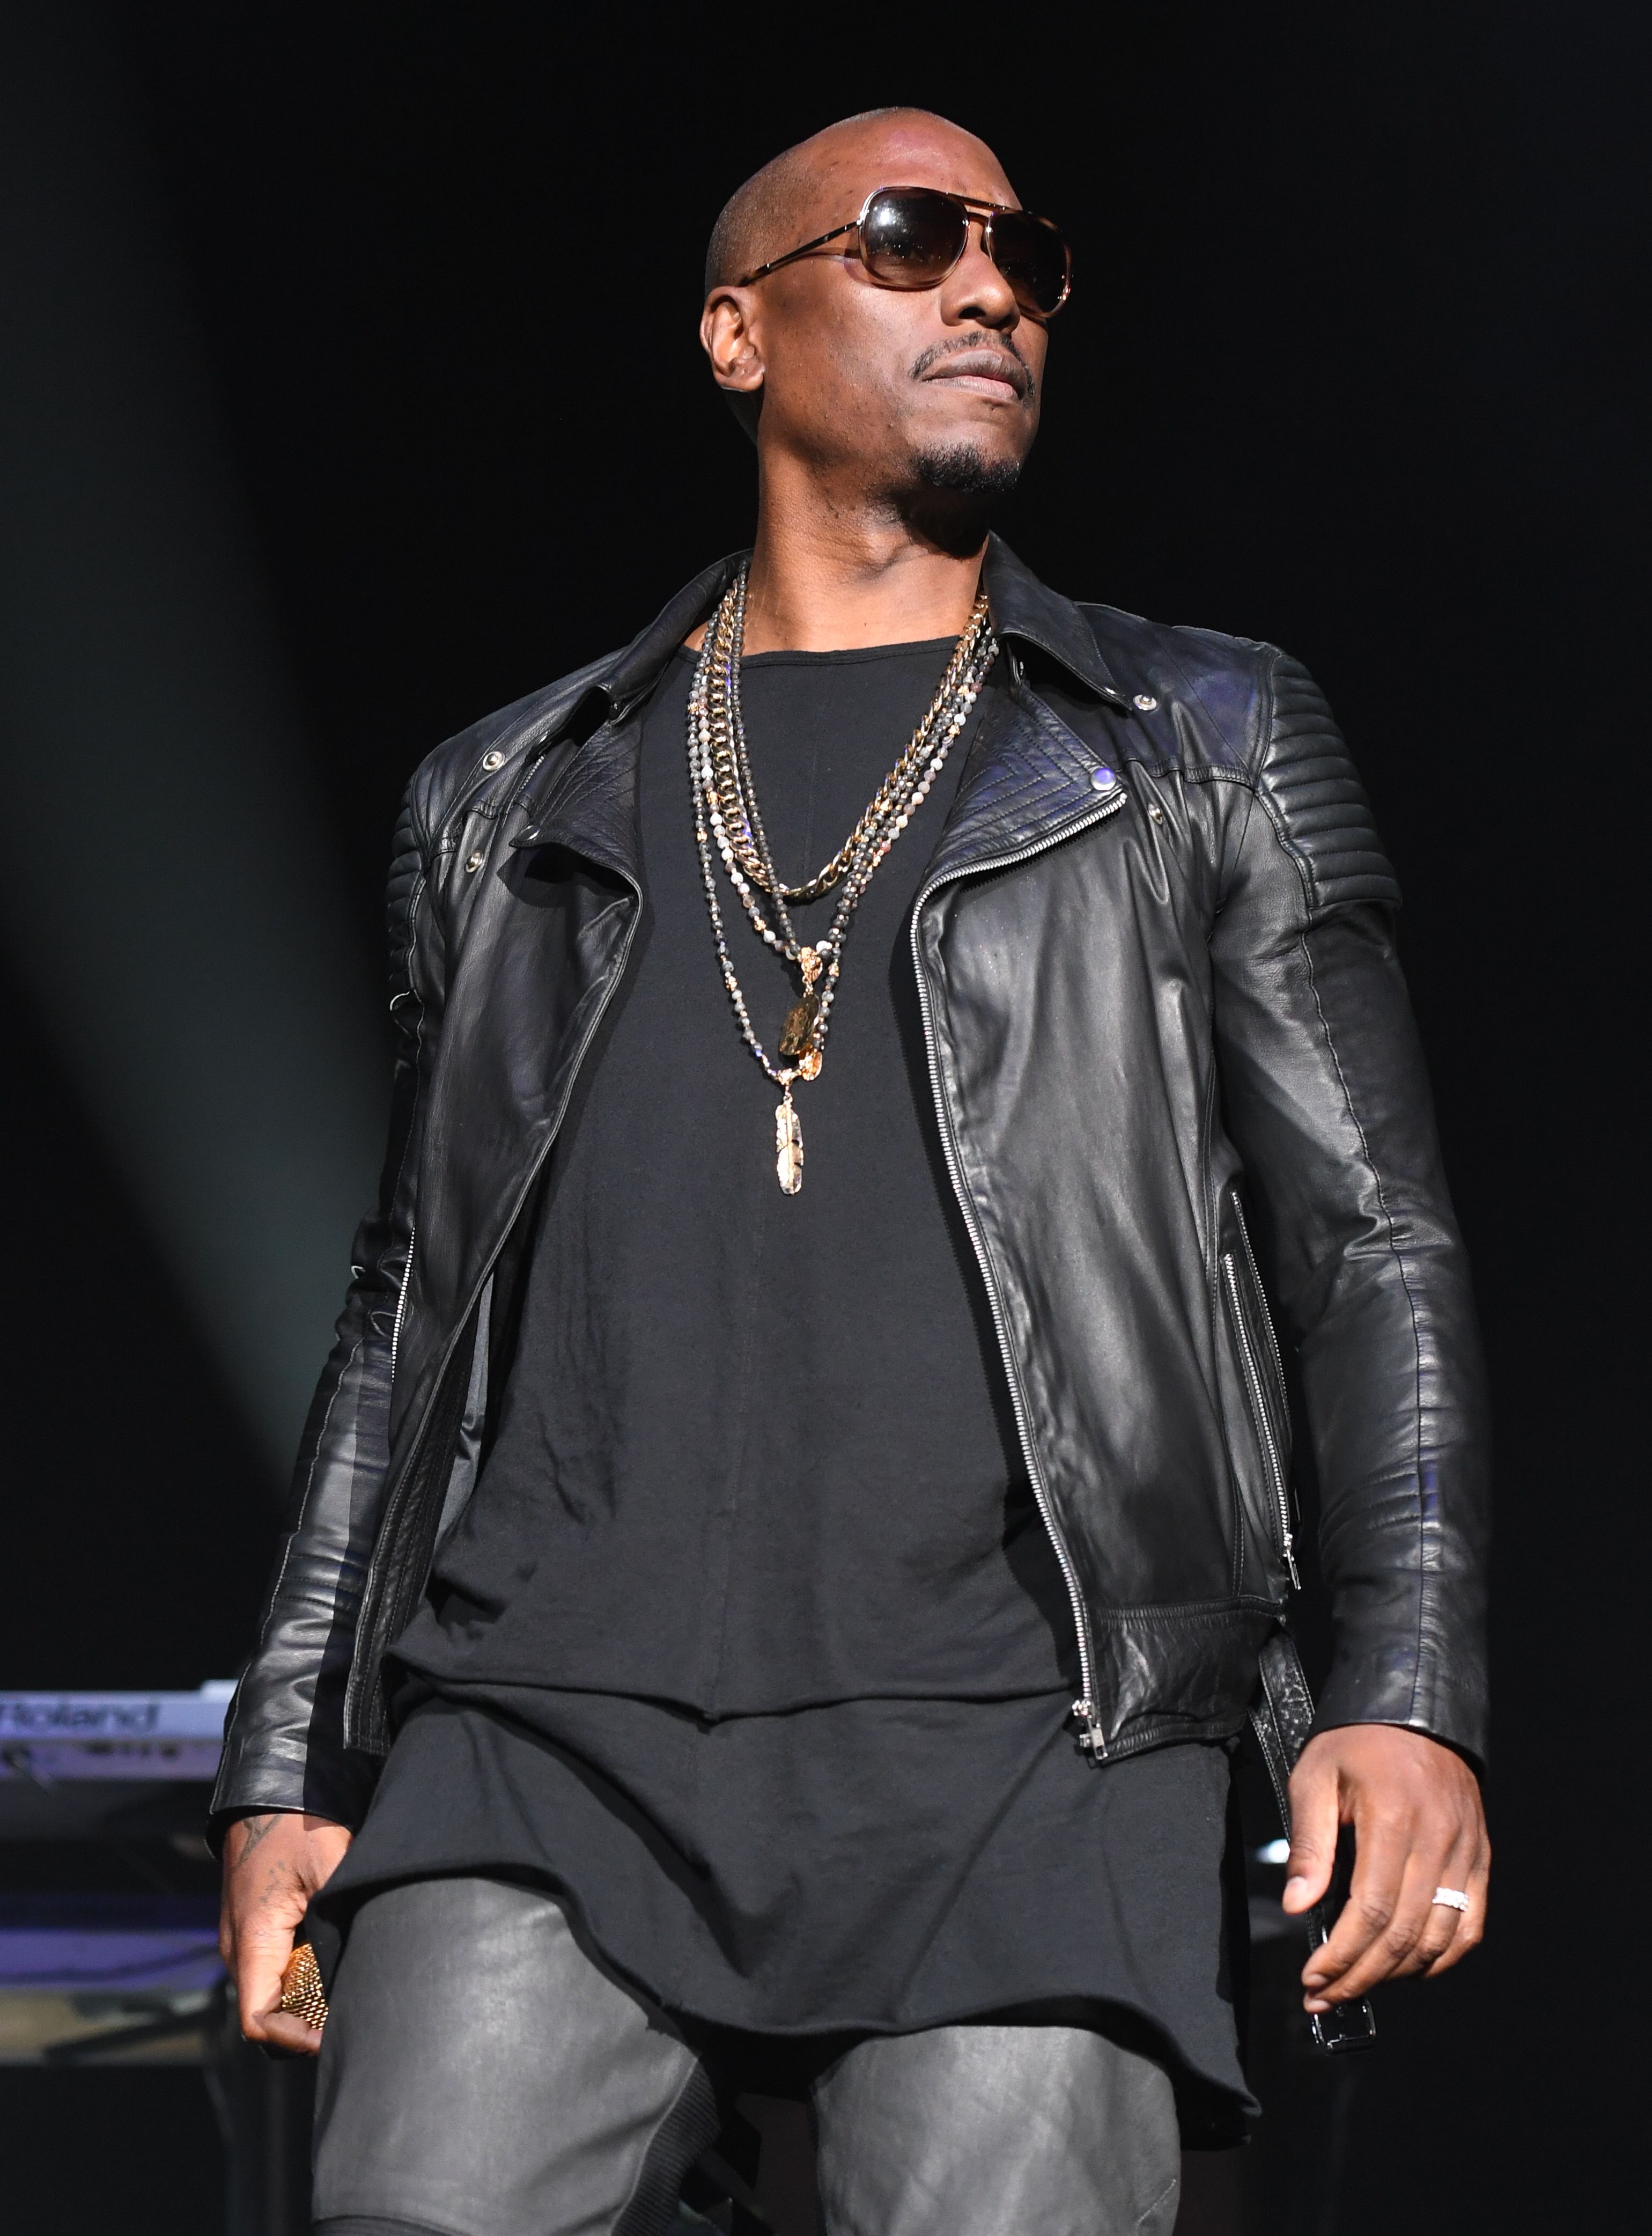 Singer Tyrese Gibson onstage in concert during the R&B Super Jam at Philips Arena on October 28, 2017 in Atlanta, Georgia | Photo: Getty Images